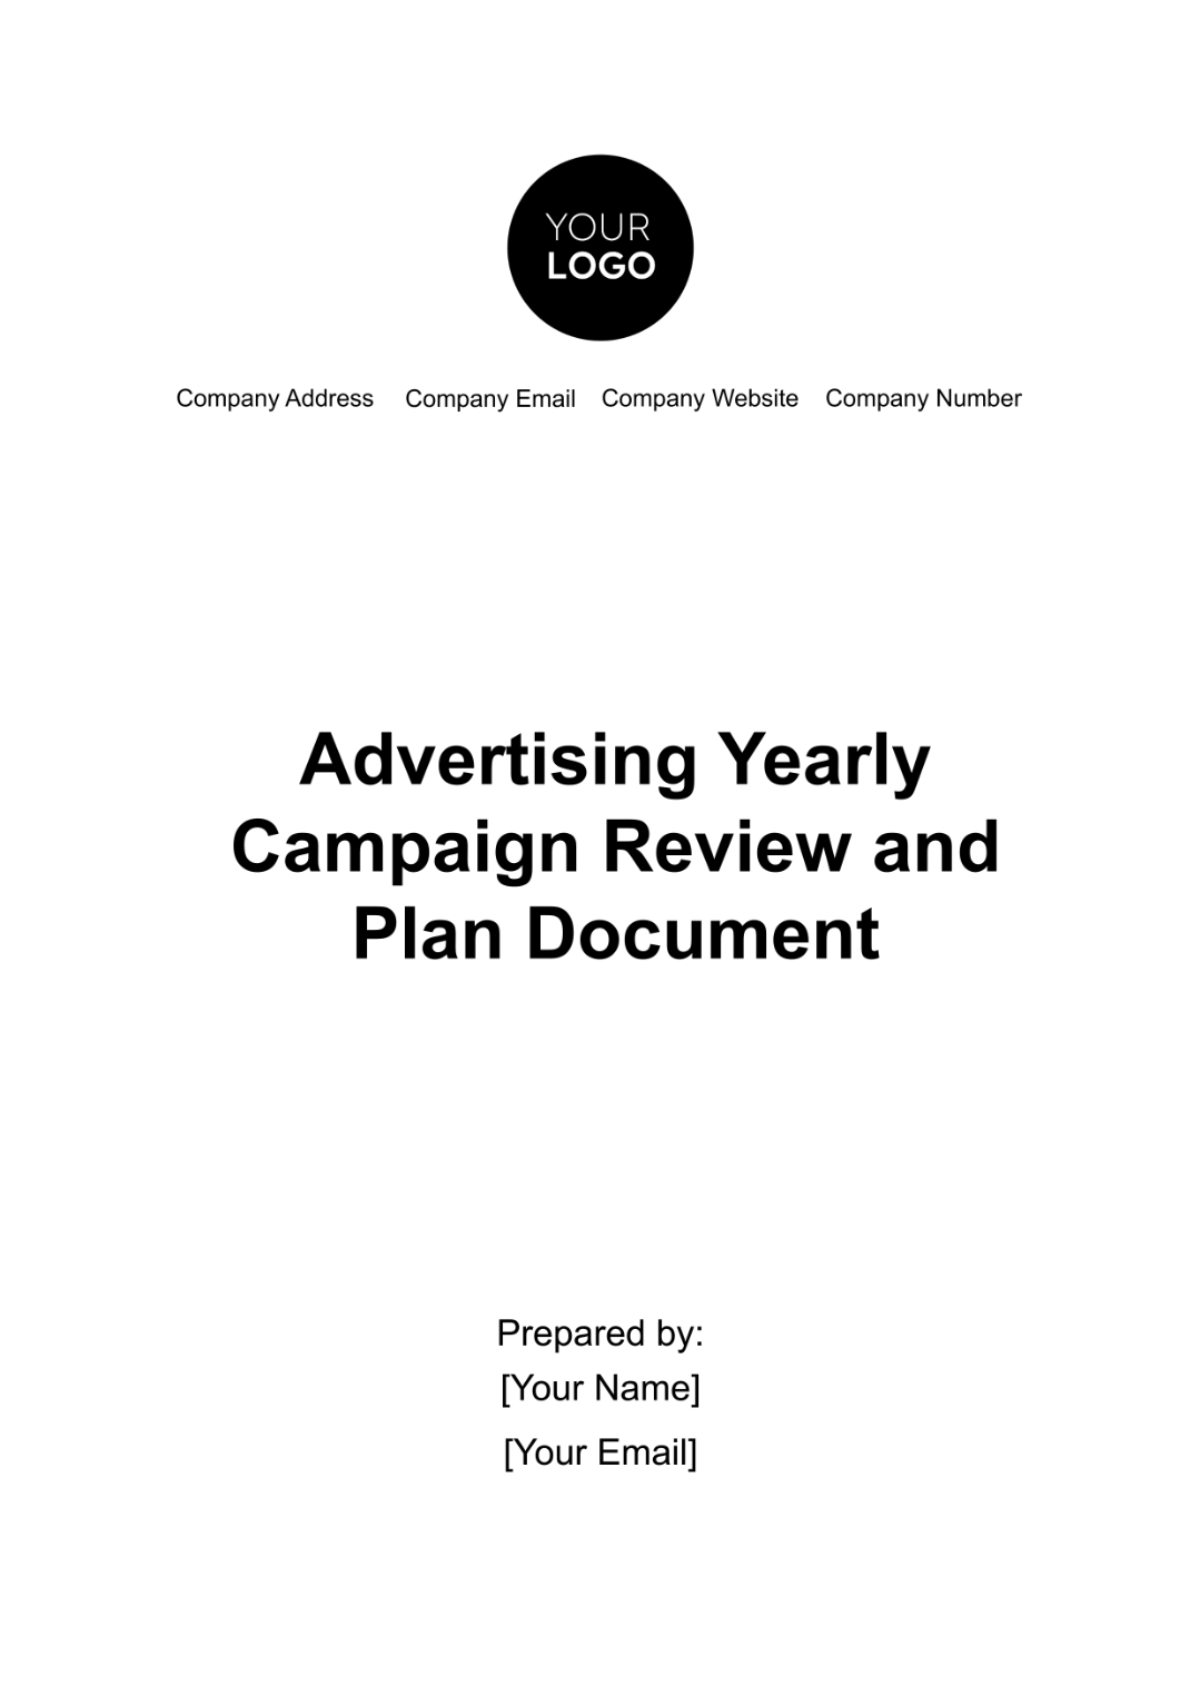 Advertising Yearly Campaign Review and Plan Document Template